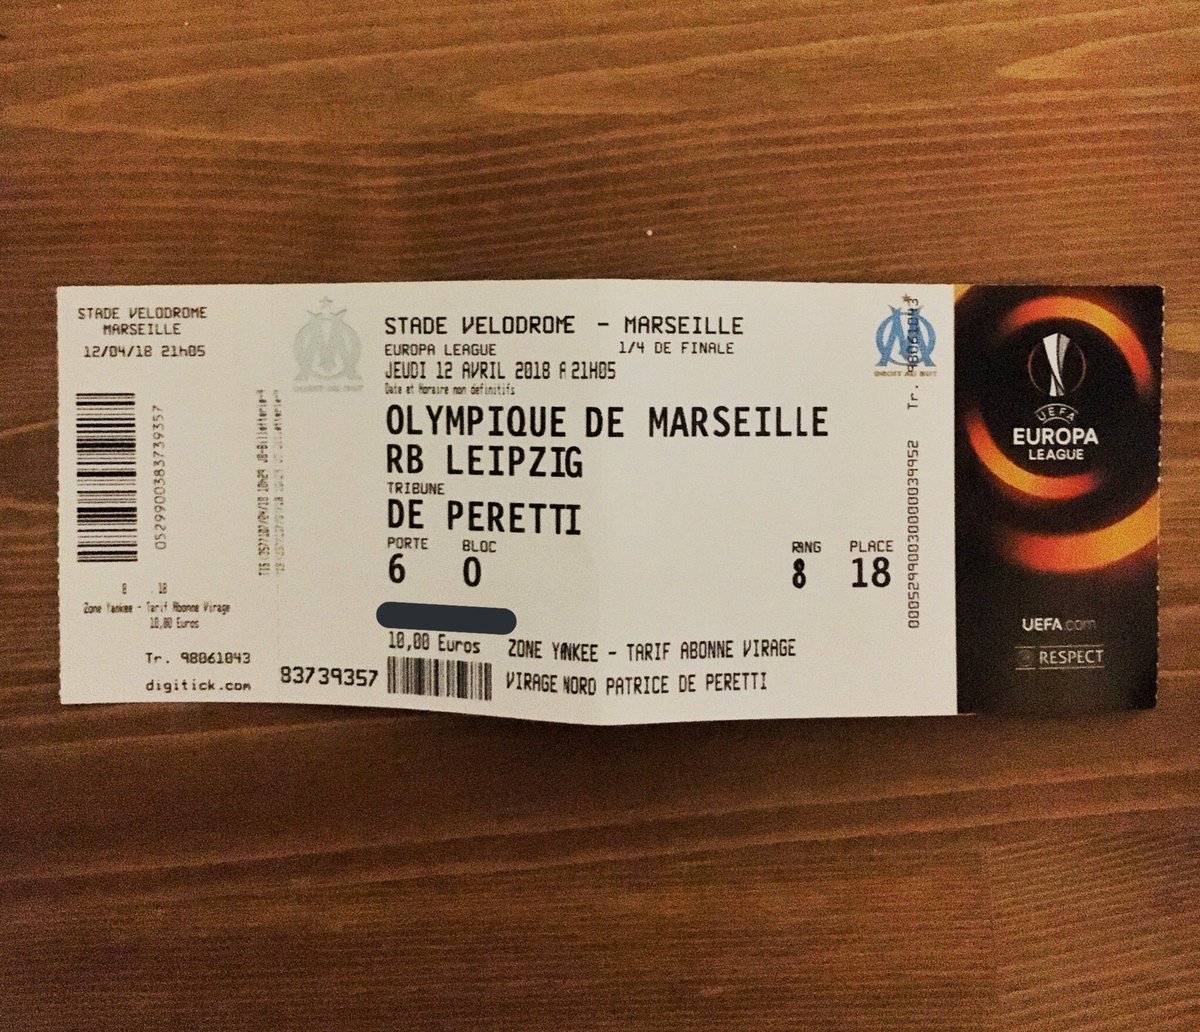 It was my second game at the Vélodrome after my Argentinian journey. I decide to go to Marseille just three days before the kickoff, I have very good friends in town and they could get me a ticket. Packed my bag with my classic Adidas OM jersey